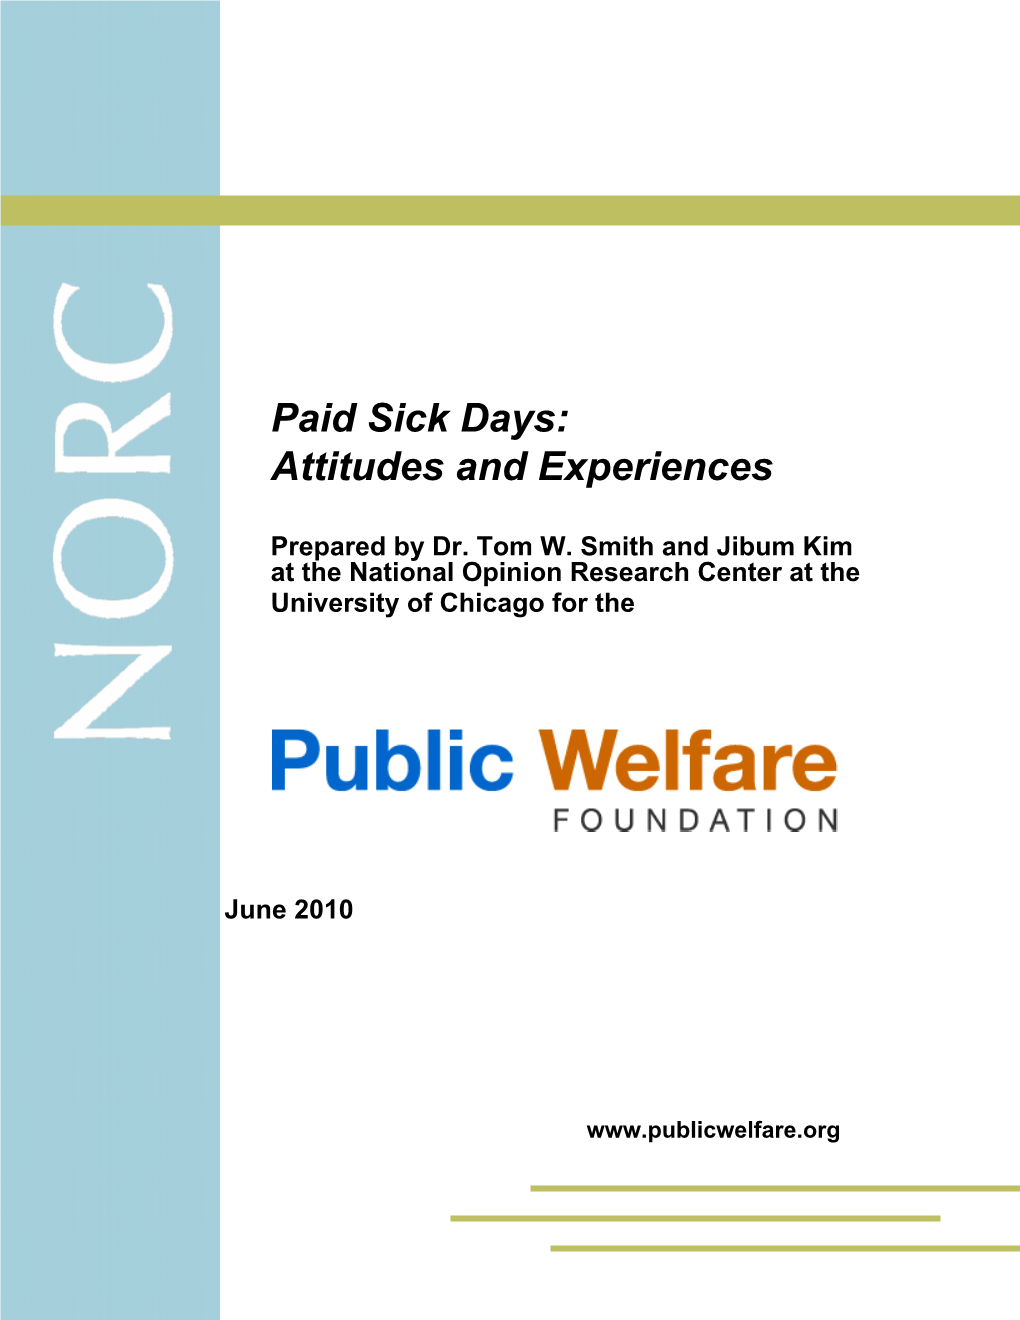 Paid Sick Days: Attitudes and Experiences